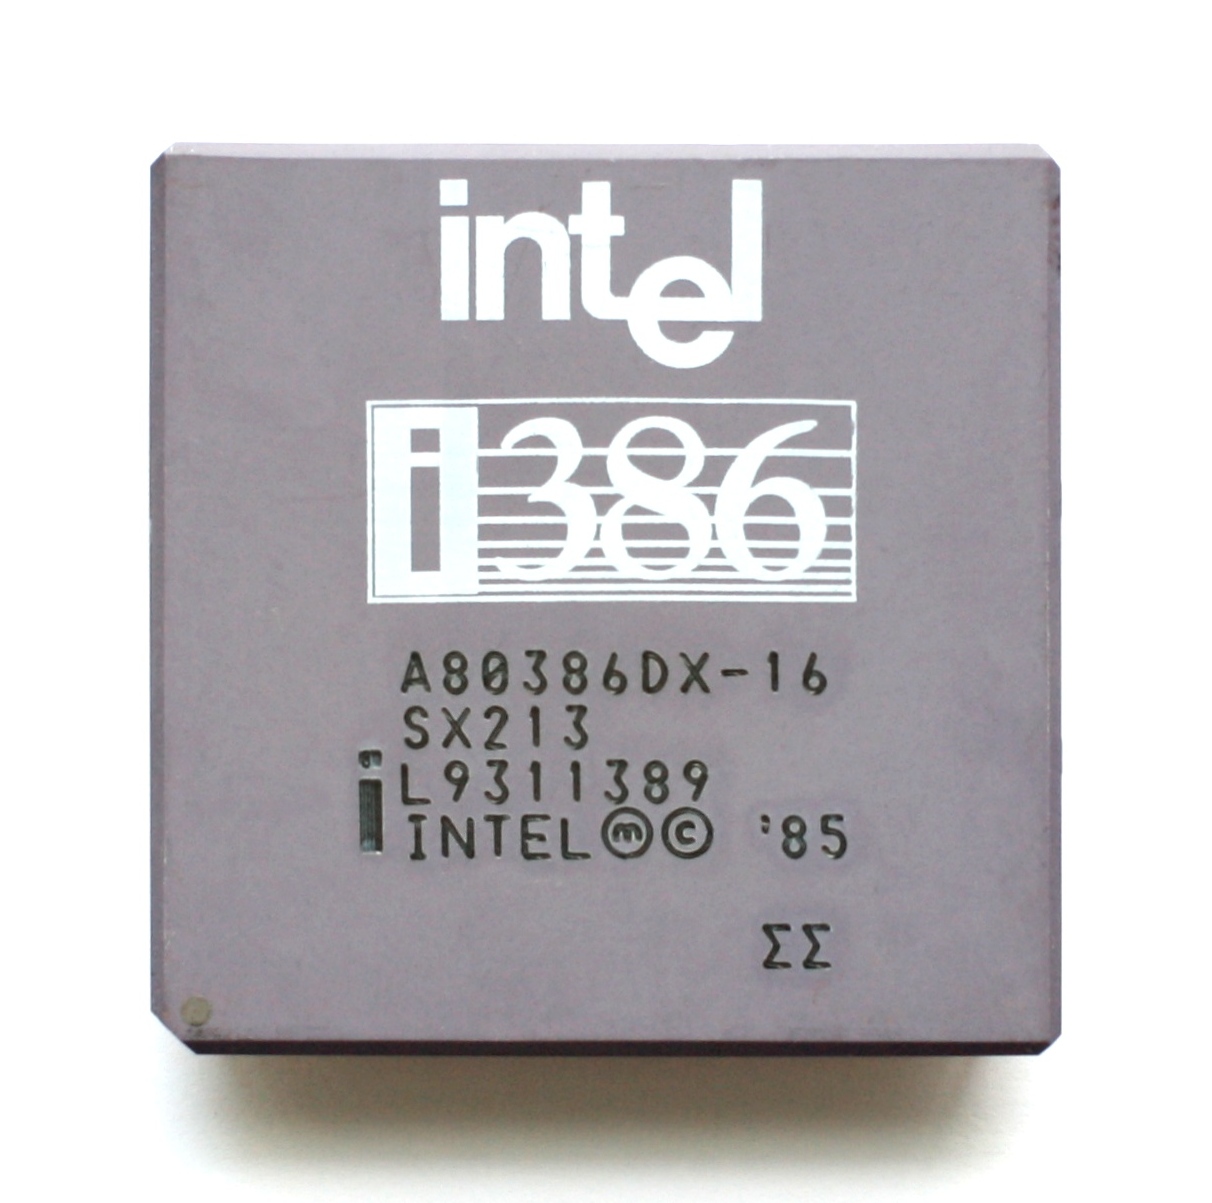 The intel 386 processor. The perfect core to run a game of classic dos Wolf3D.